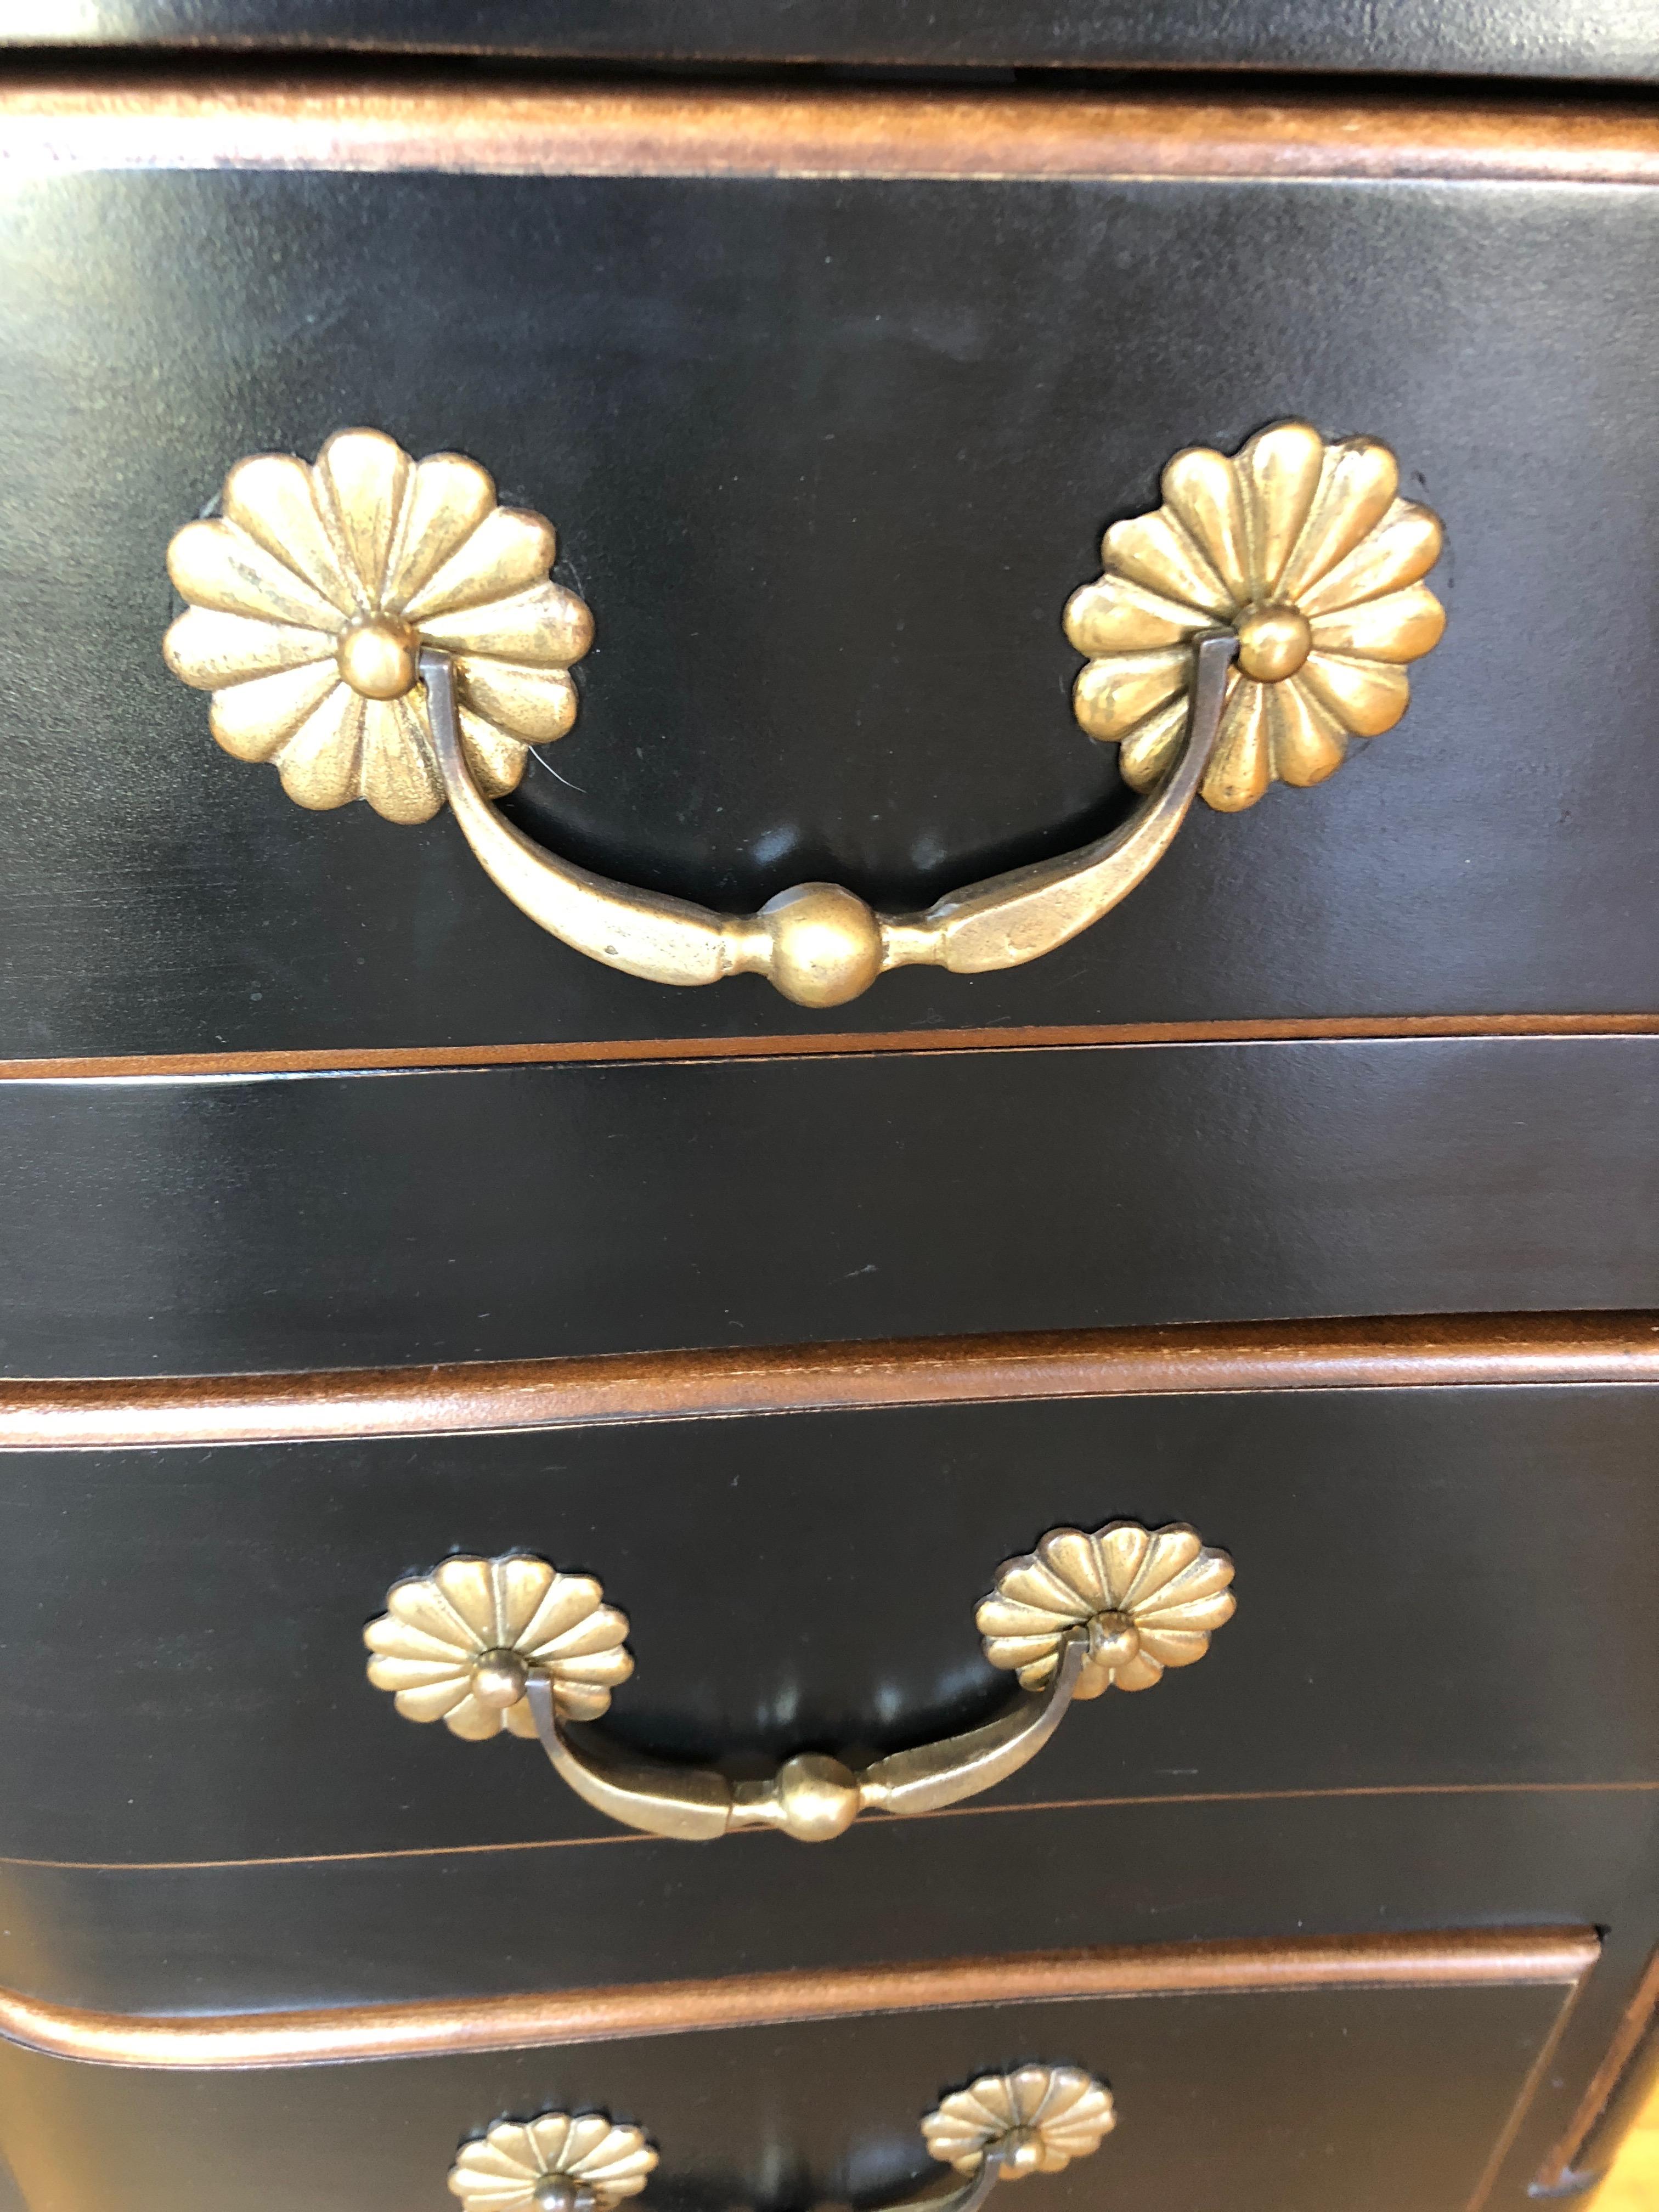 Impressive and elegant black ebonized serpentine chest of drawers having 3 large drawers and stunning gold decorative hardware. Detailed edges are a rich mahogany that offsets the black beautifully.